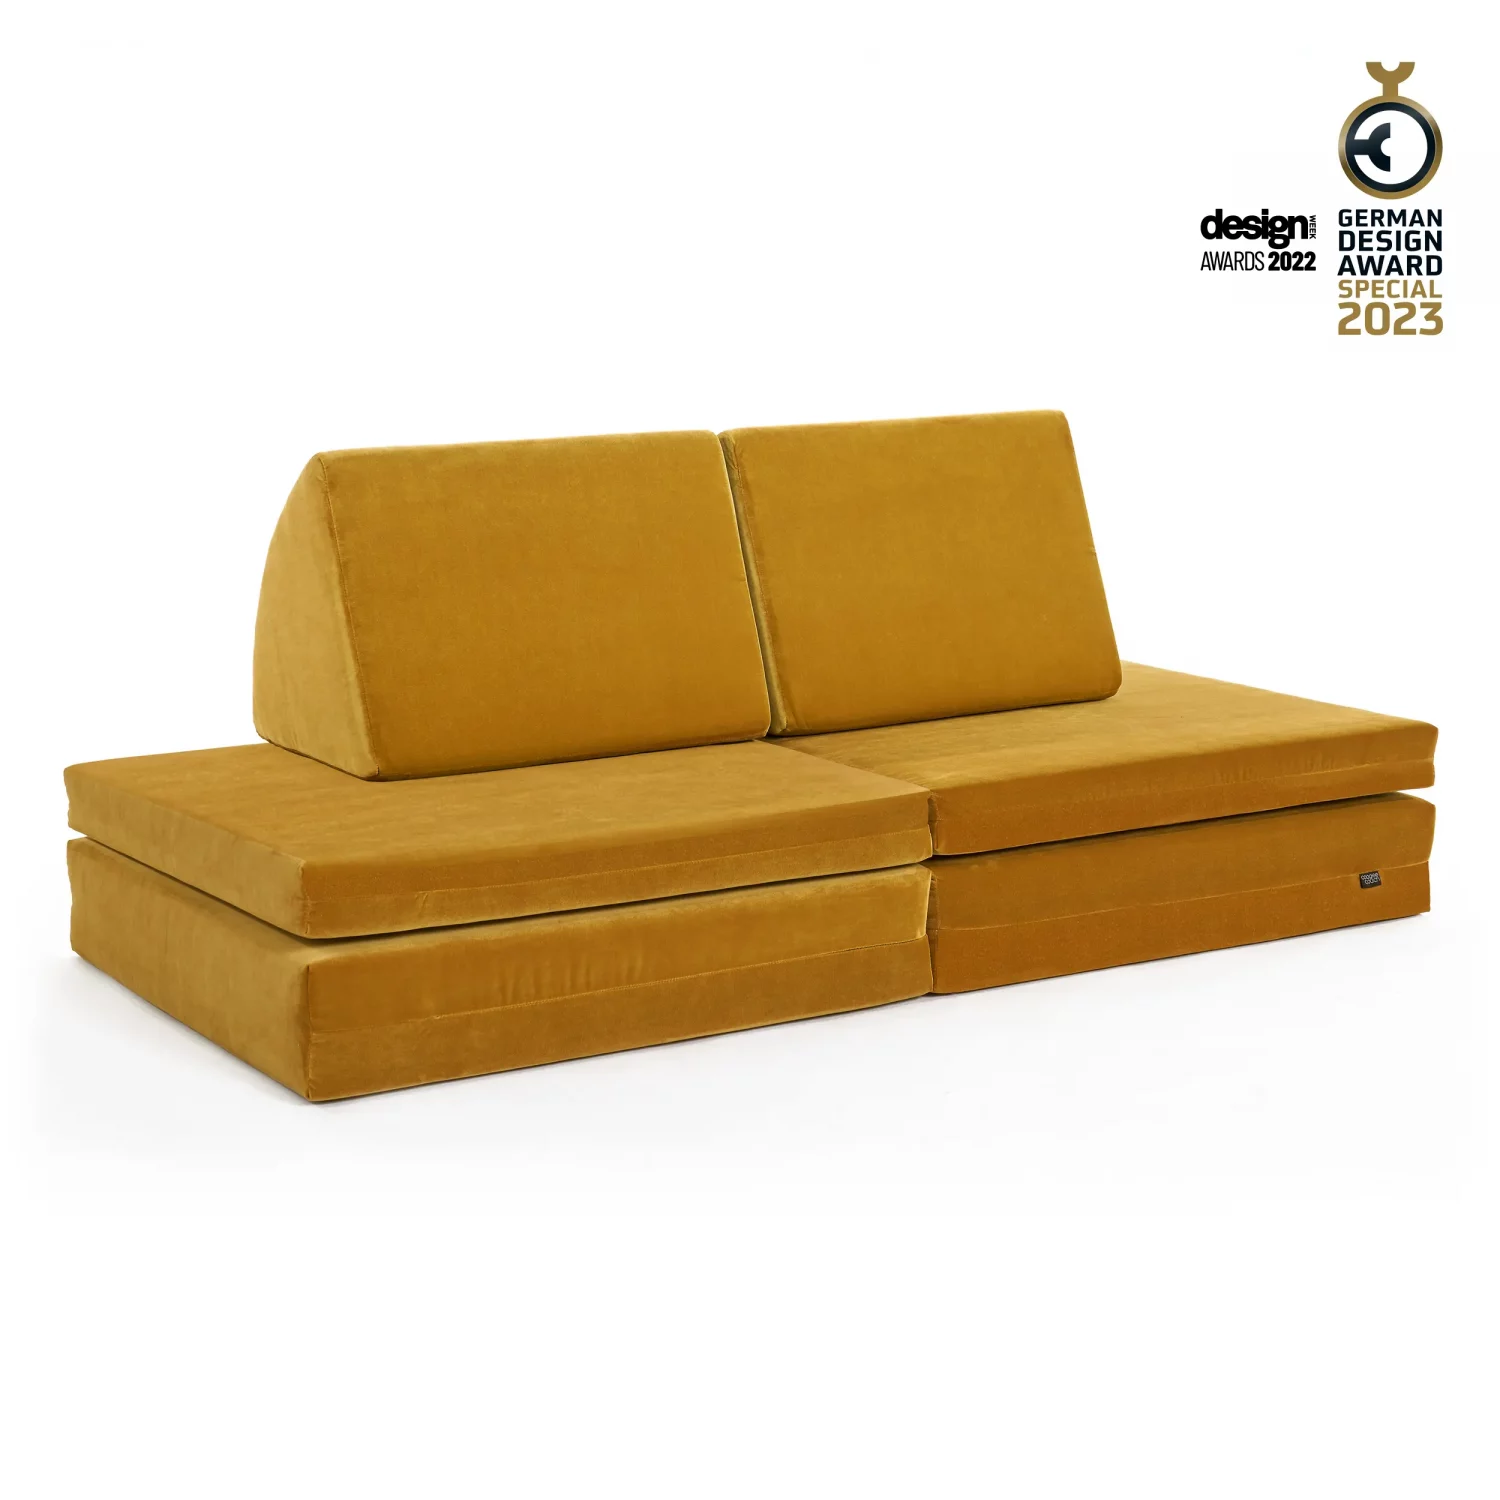 coogeecouch | Award | German Design Award 2023  | Kindersofa | Serie: tesoro-de-oro | Farbe: amber-gold gold | Ansicht: Front schräg | made in Germany